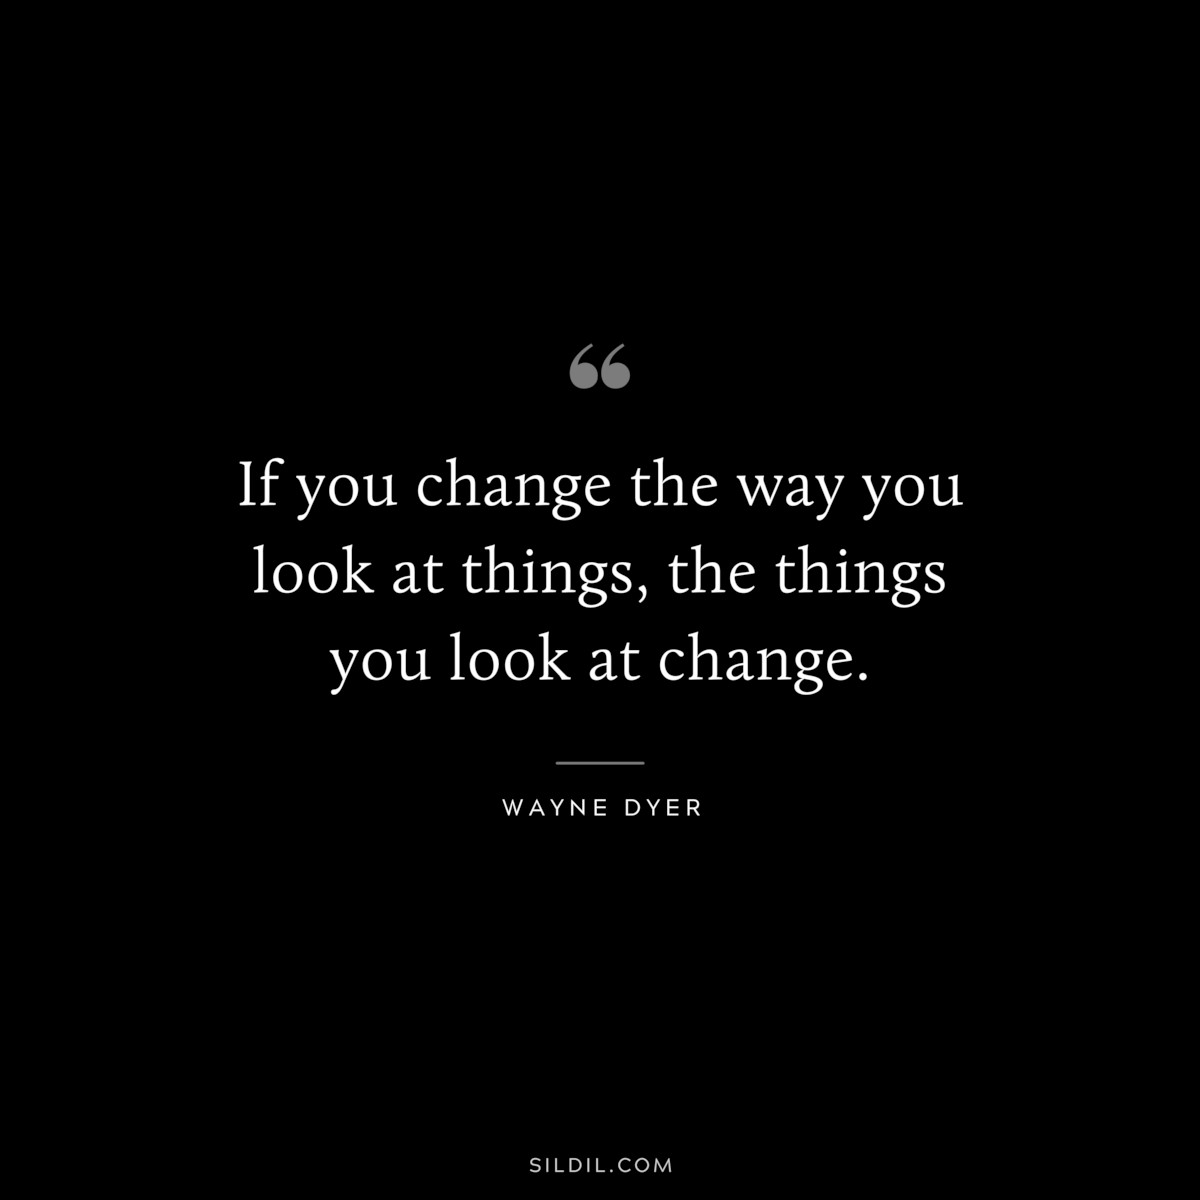 If you change the way you look at things, the things you look at change. ― Wayne Dyer